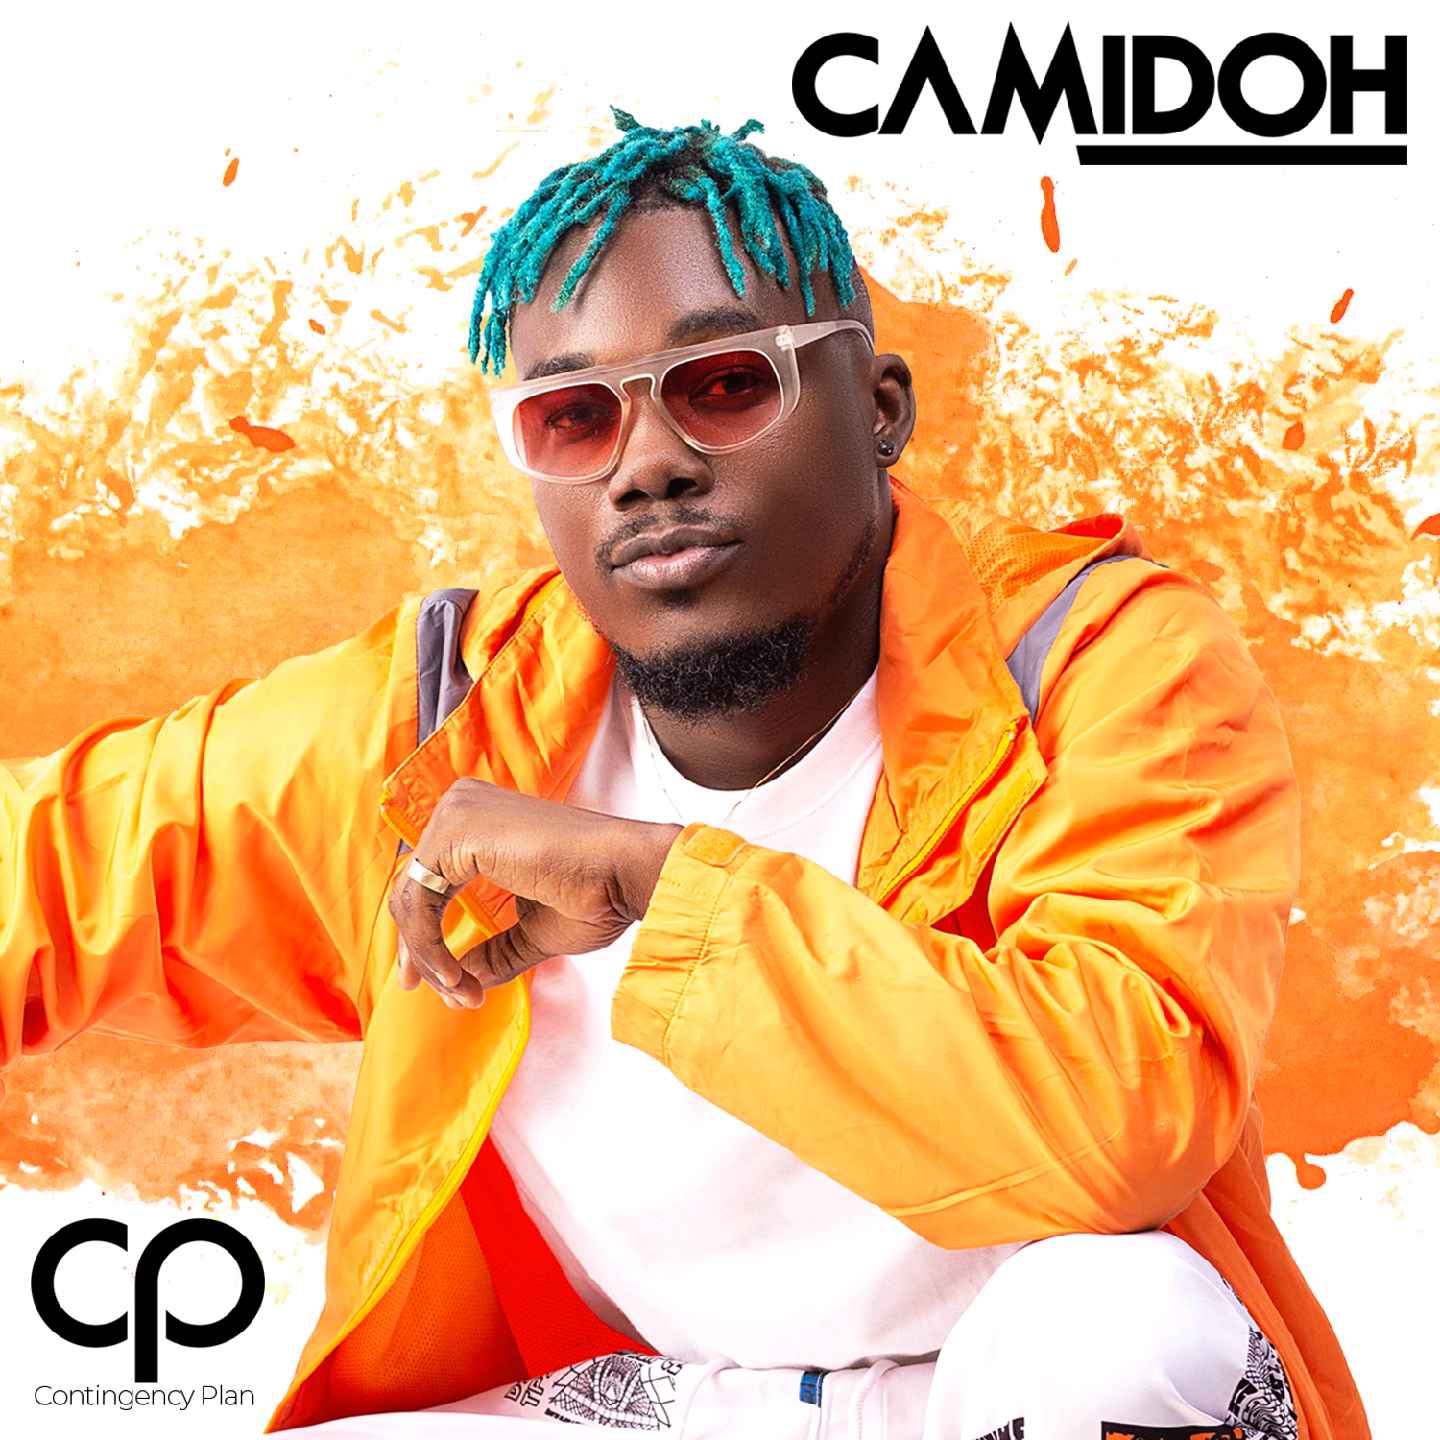 Here are 8 of Camidoh's Best Songs